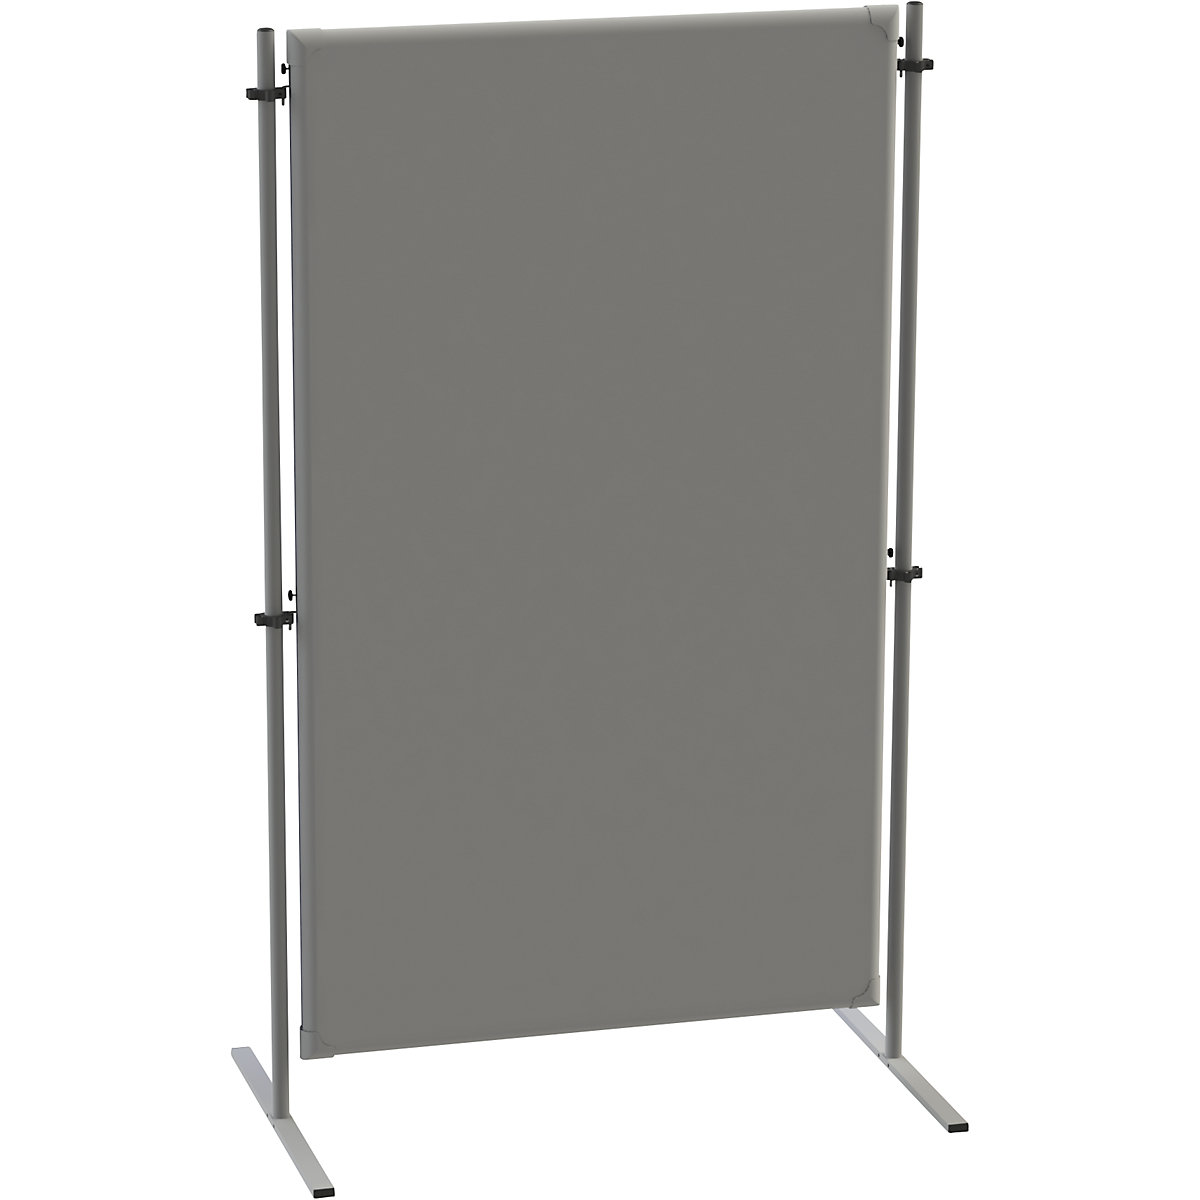 Acoustic partition – eurokraft pro, with 2 flat T-shaped feet, base element, WxD 1000 x 650 mm, grey-7